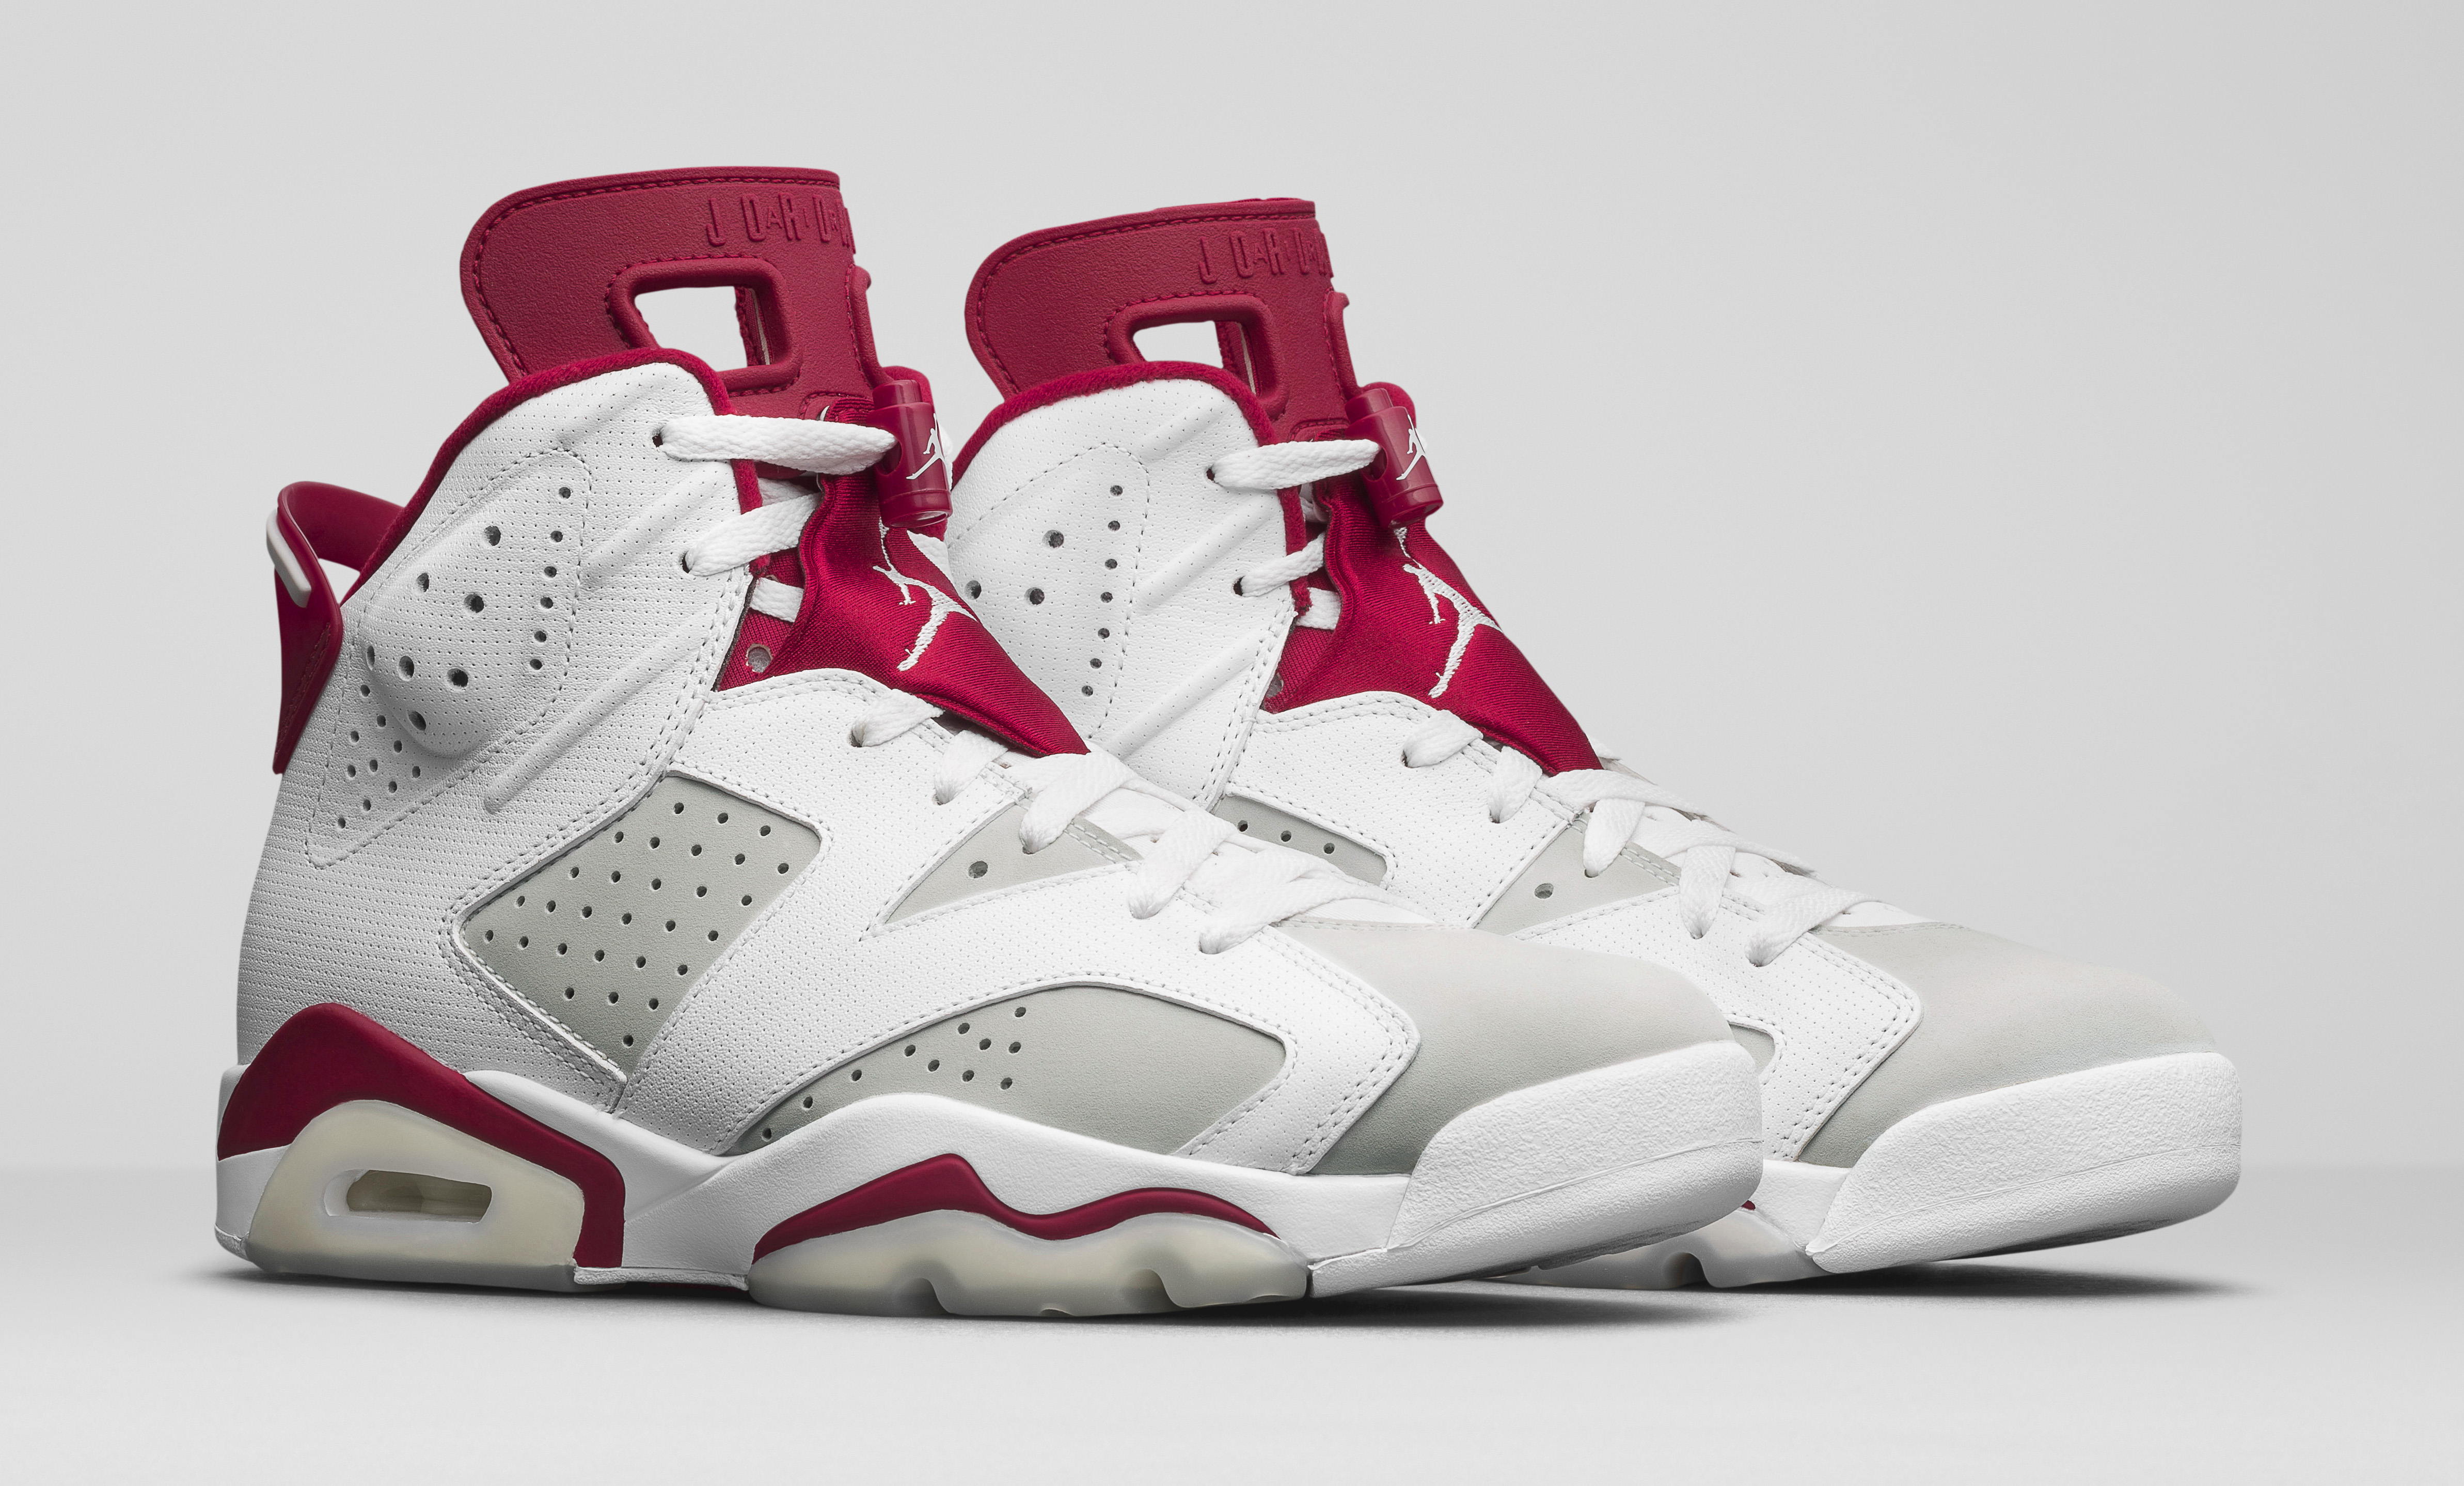 jordan 6s white and red